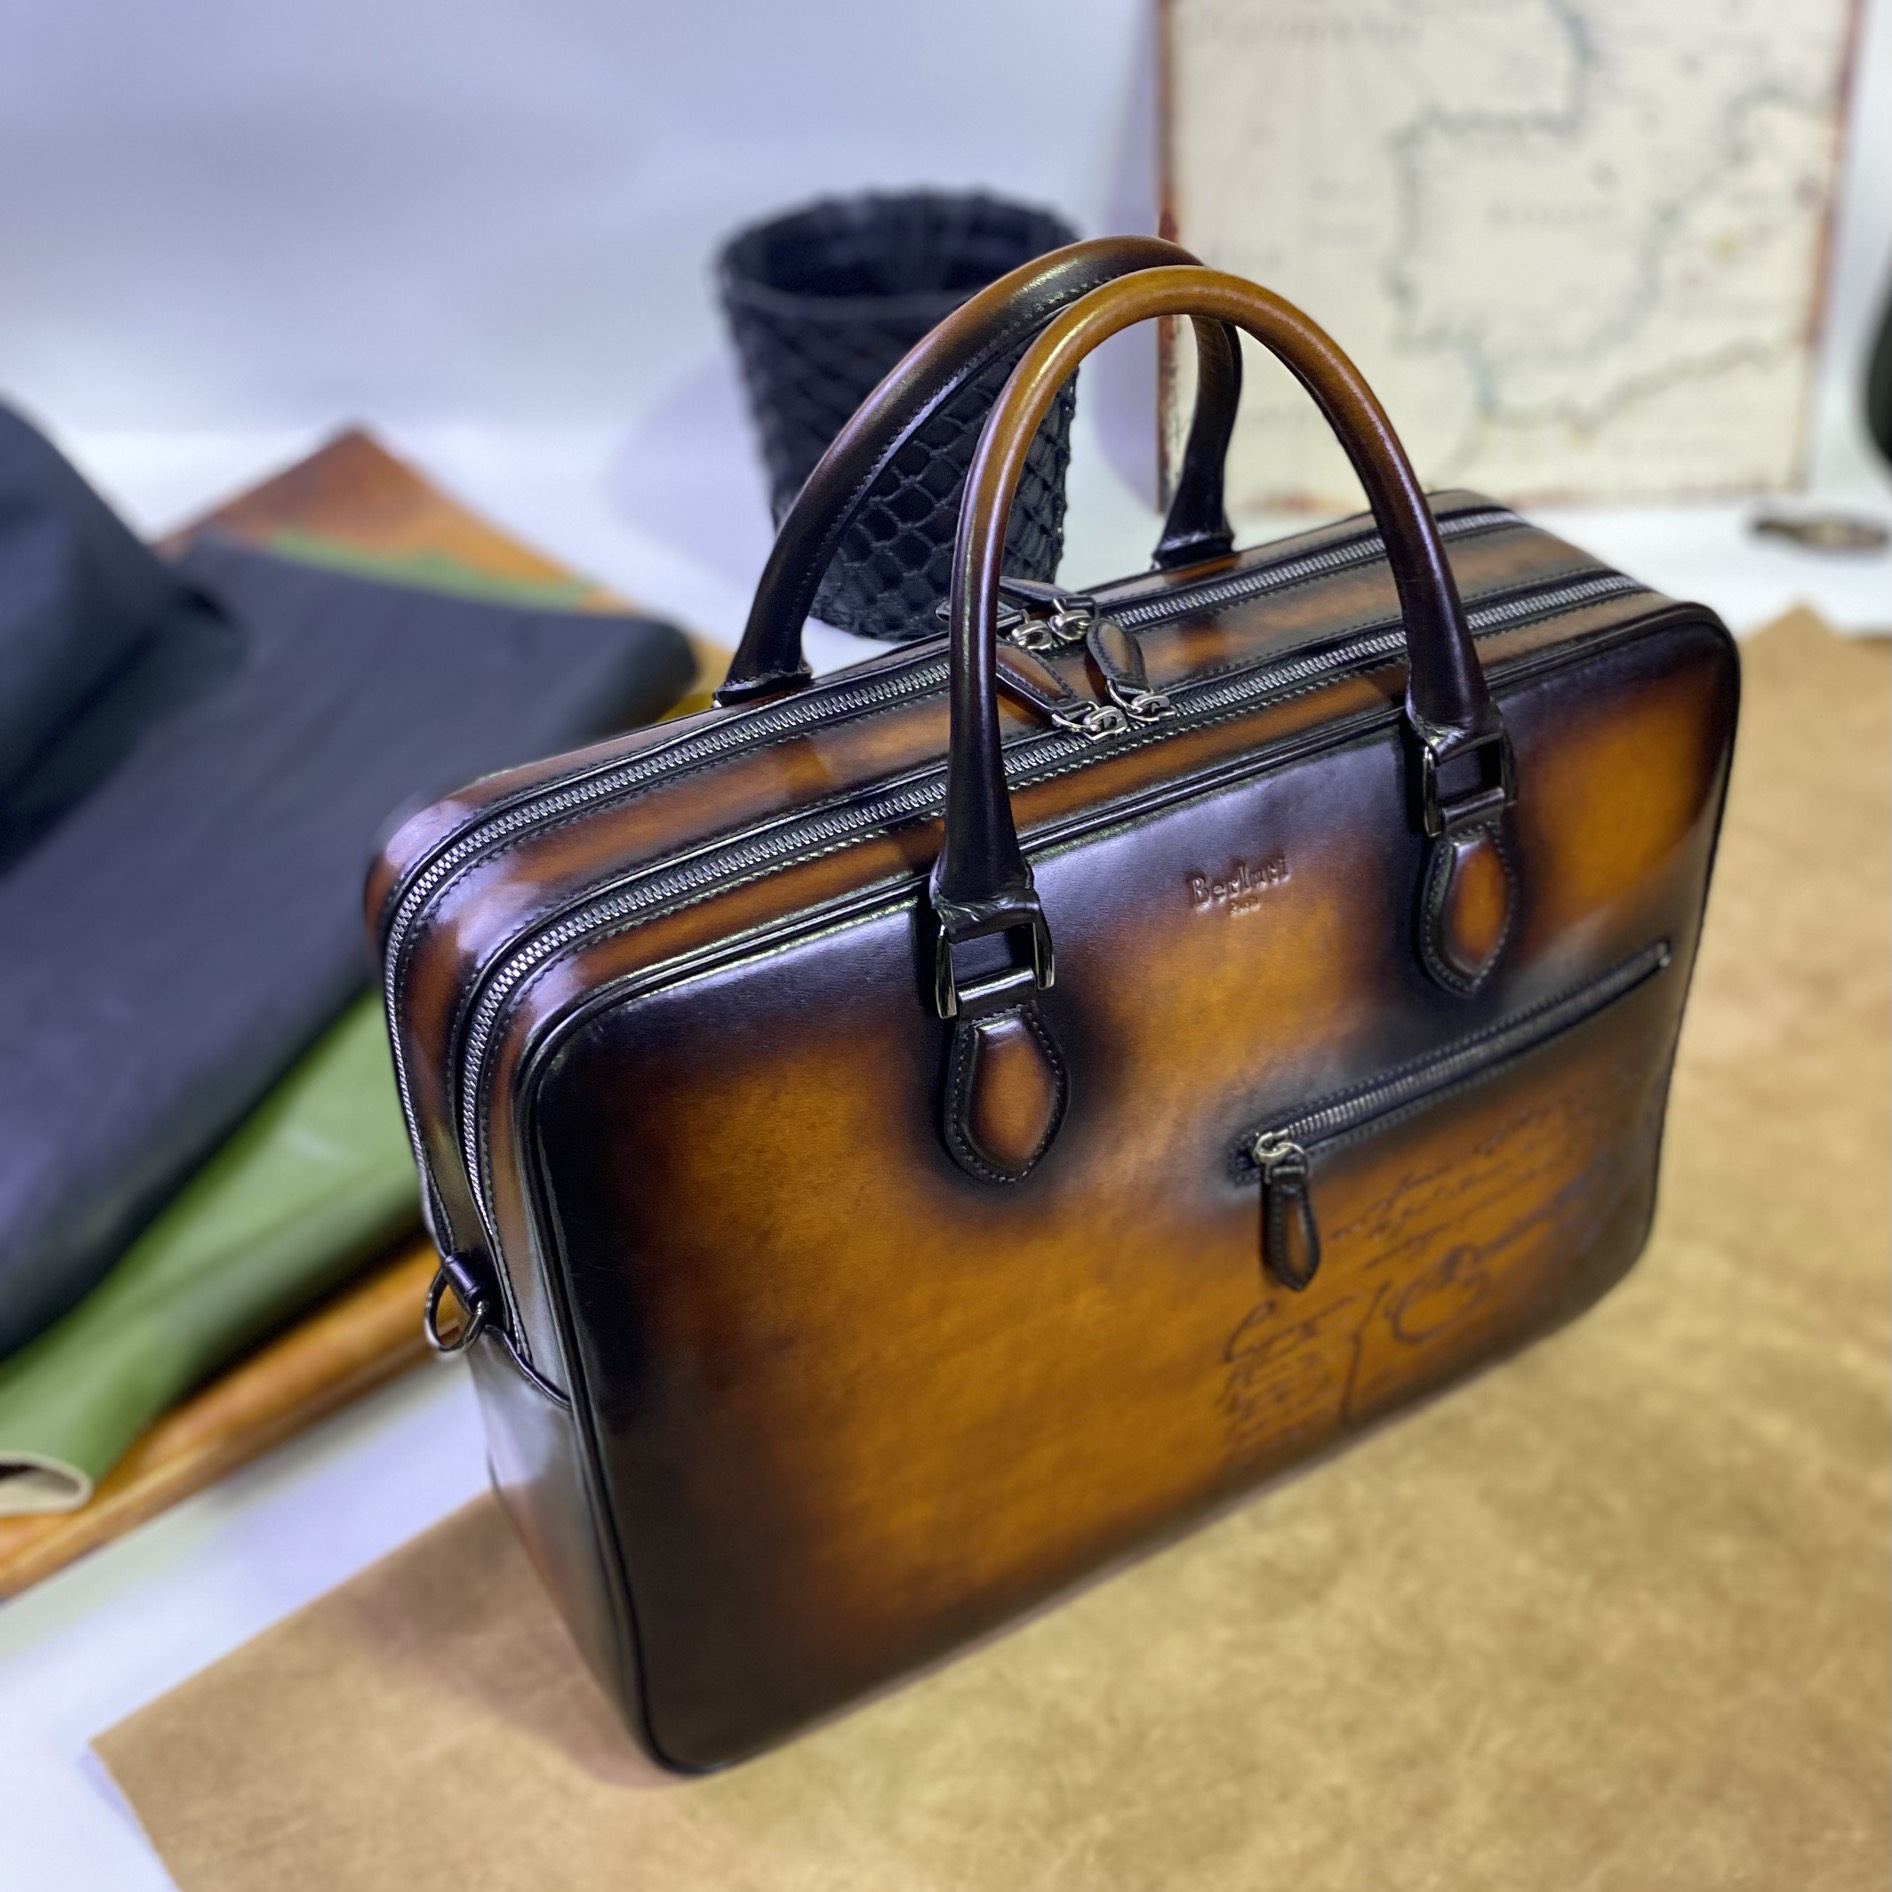 Business Briefcase Handmade Deux Jours Scritto Pattern Leather Briefcase Plus Large Double Zipper Design Hand Polished Color